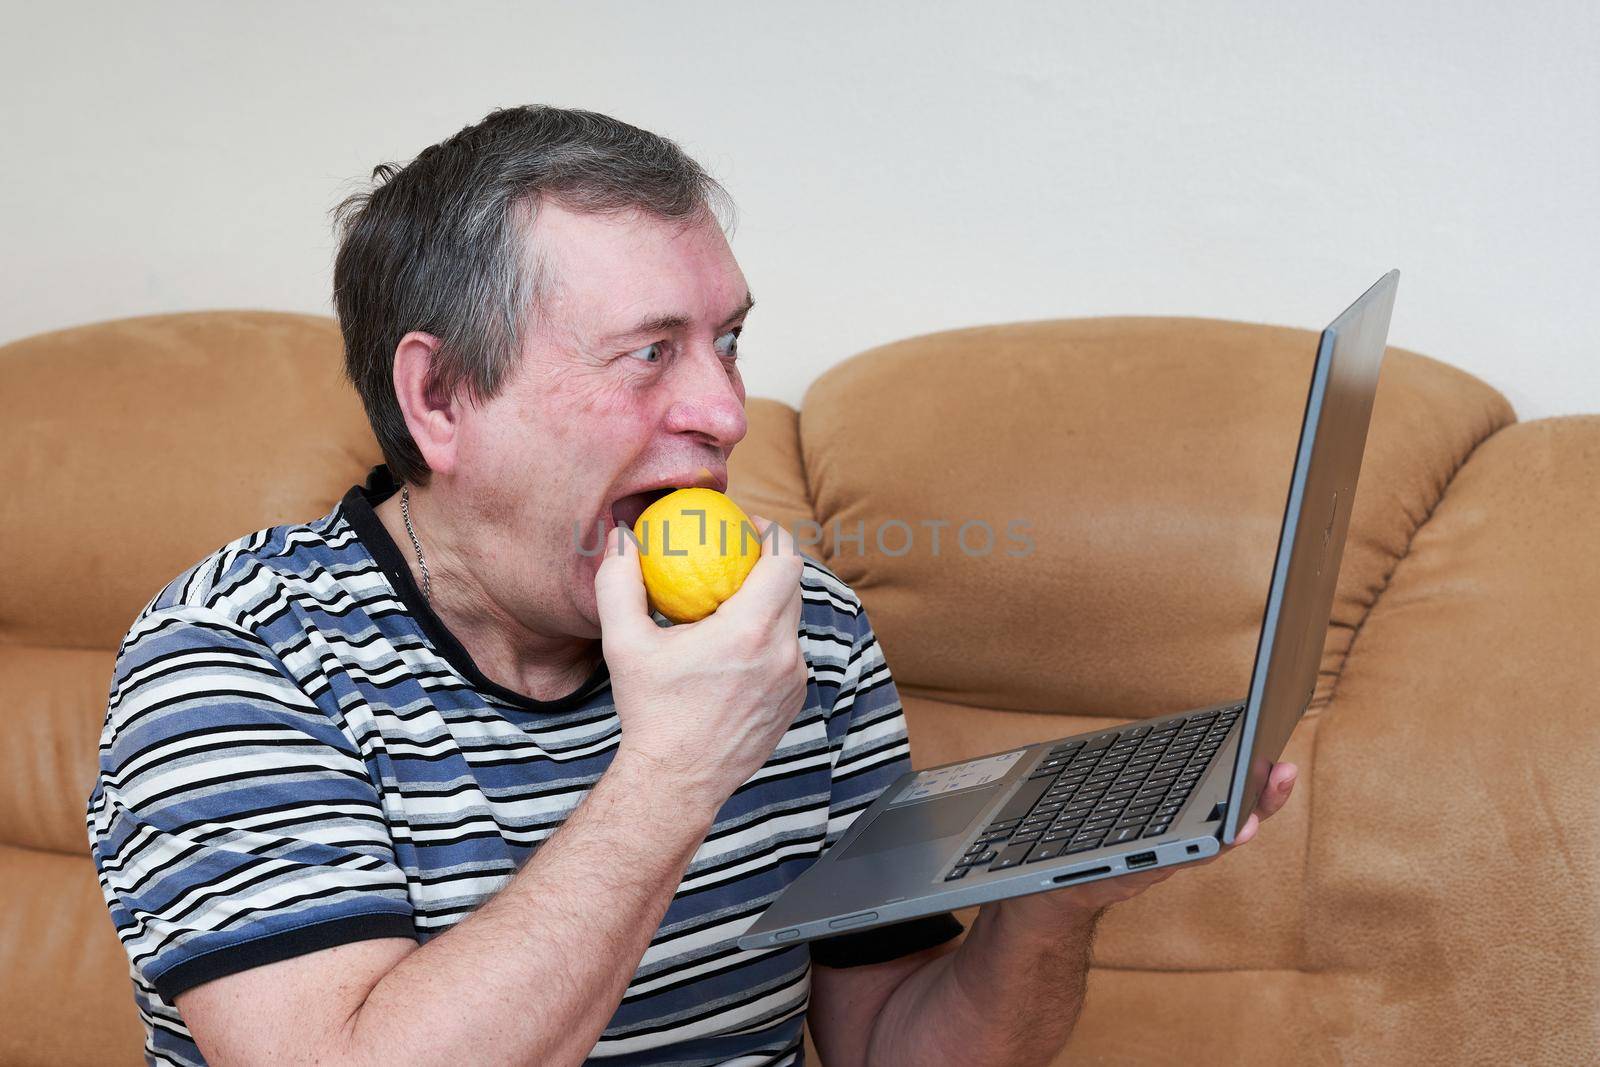 Freak eats lemon while holding a laptop while sitting on the couch. Emotions from the news